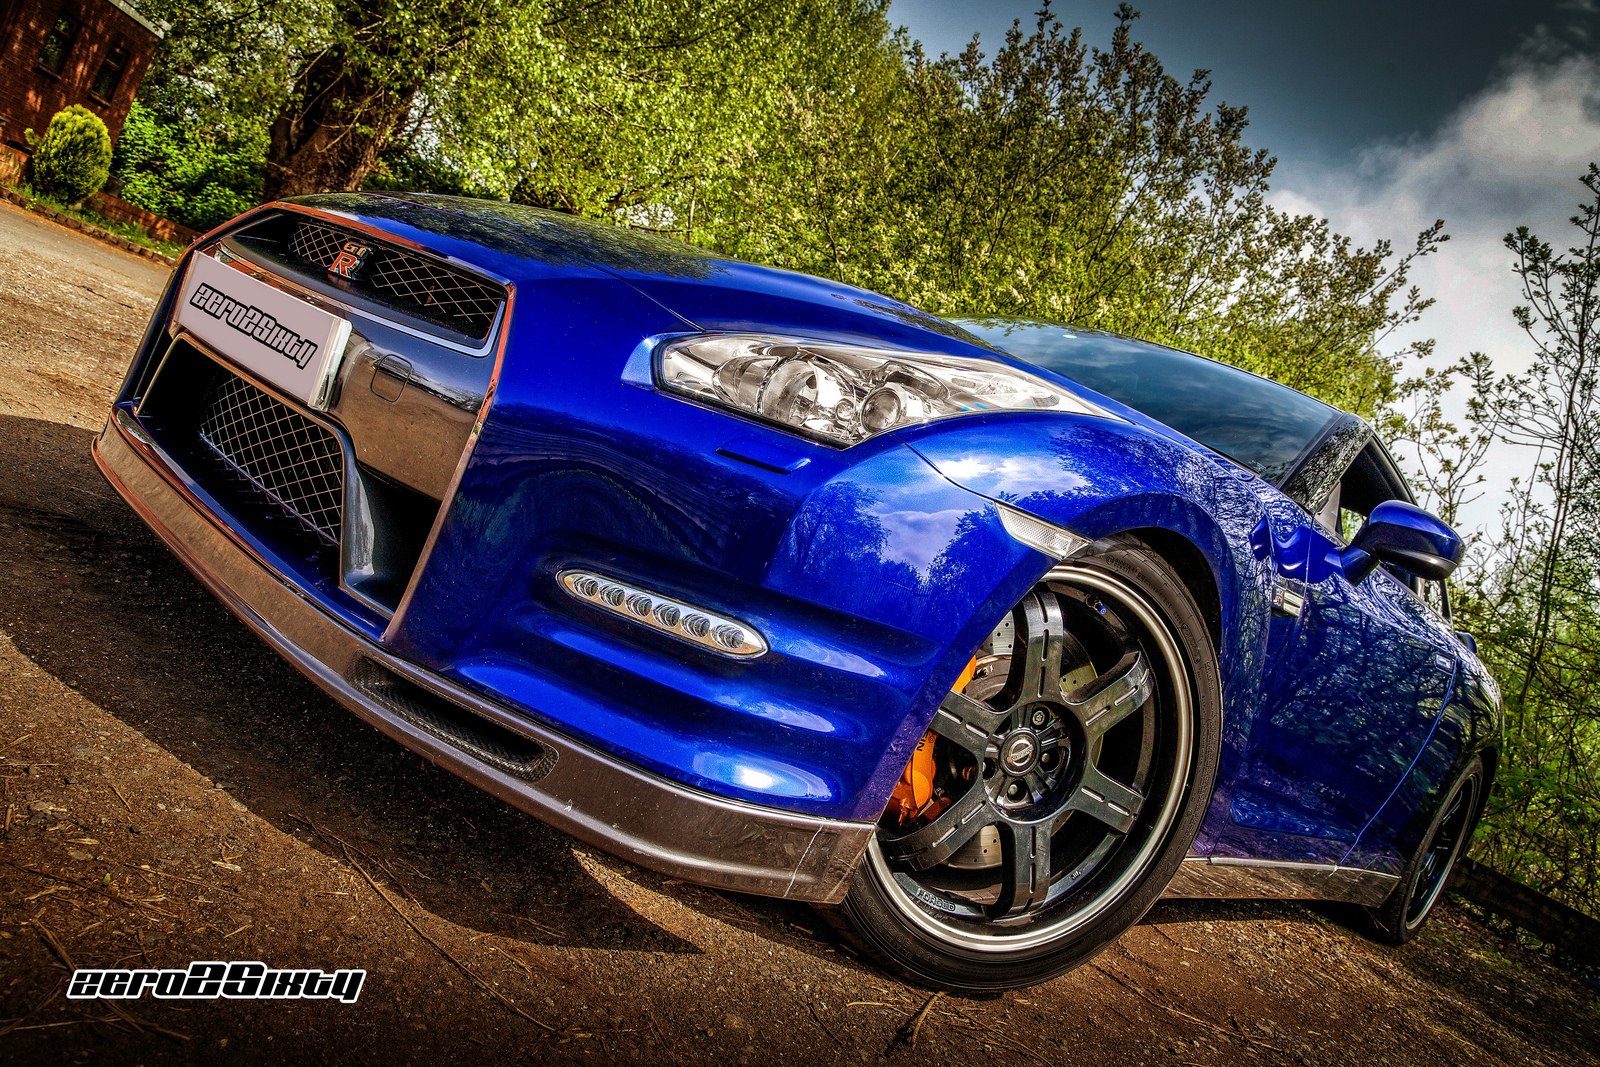 gt r, Nismo, Nissan, R35, Tuning, Supercar, Coupe, Japan, Cars, Blue